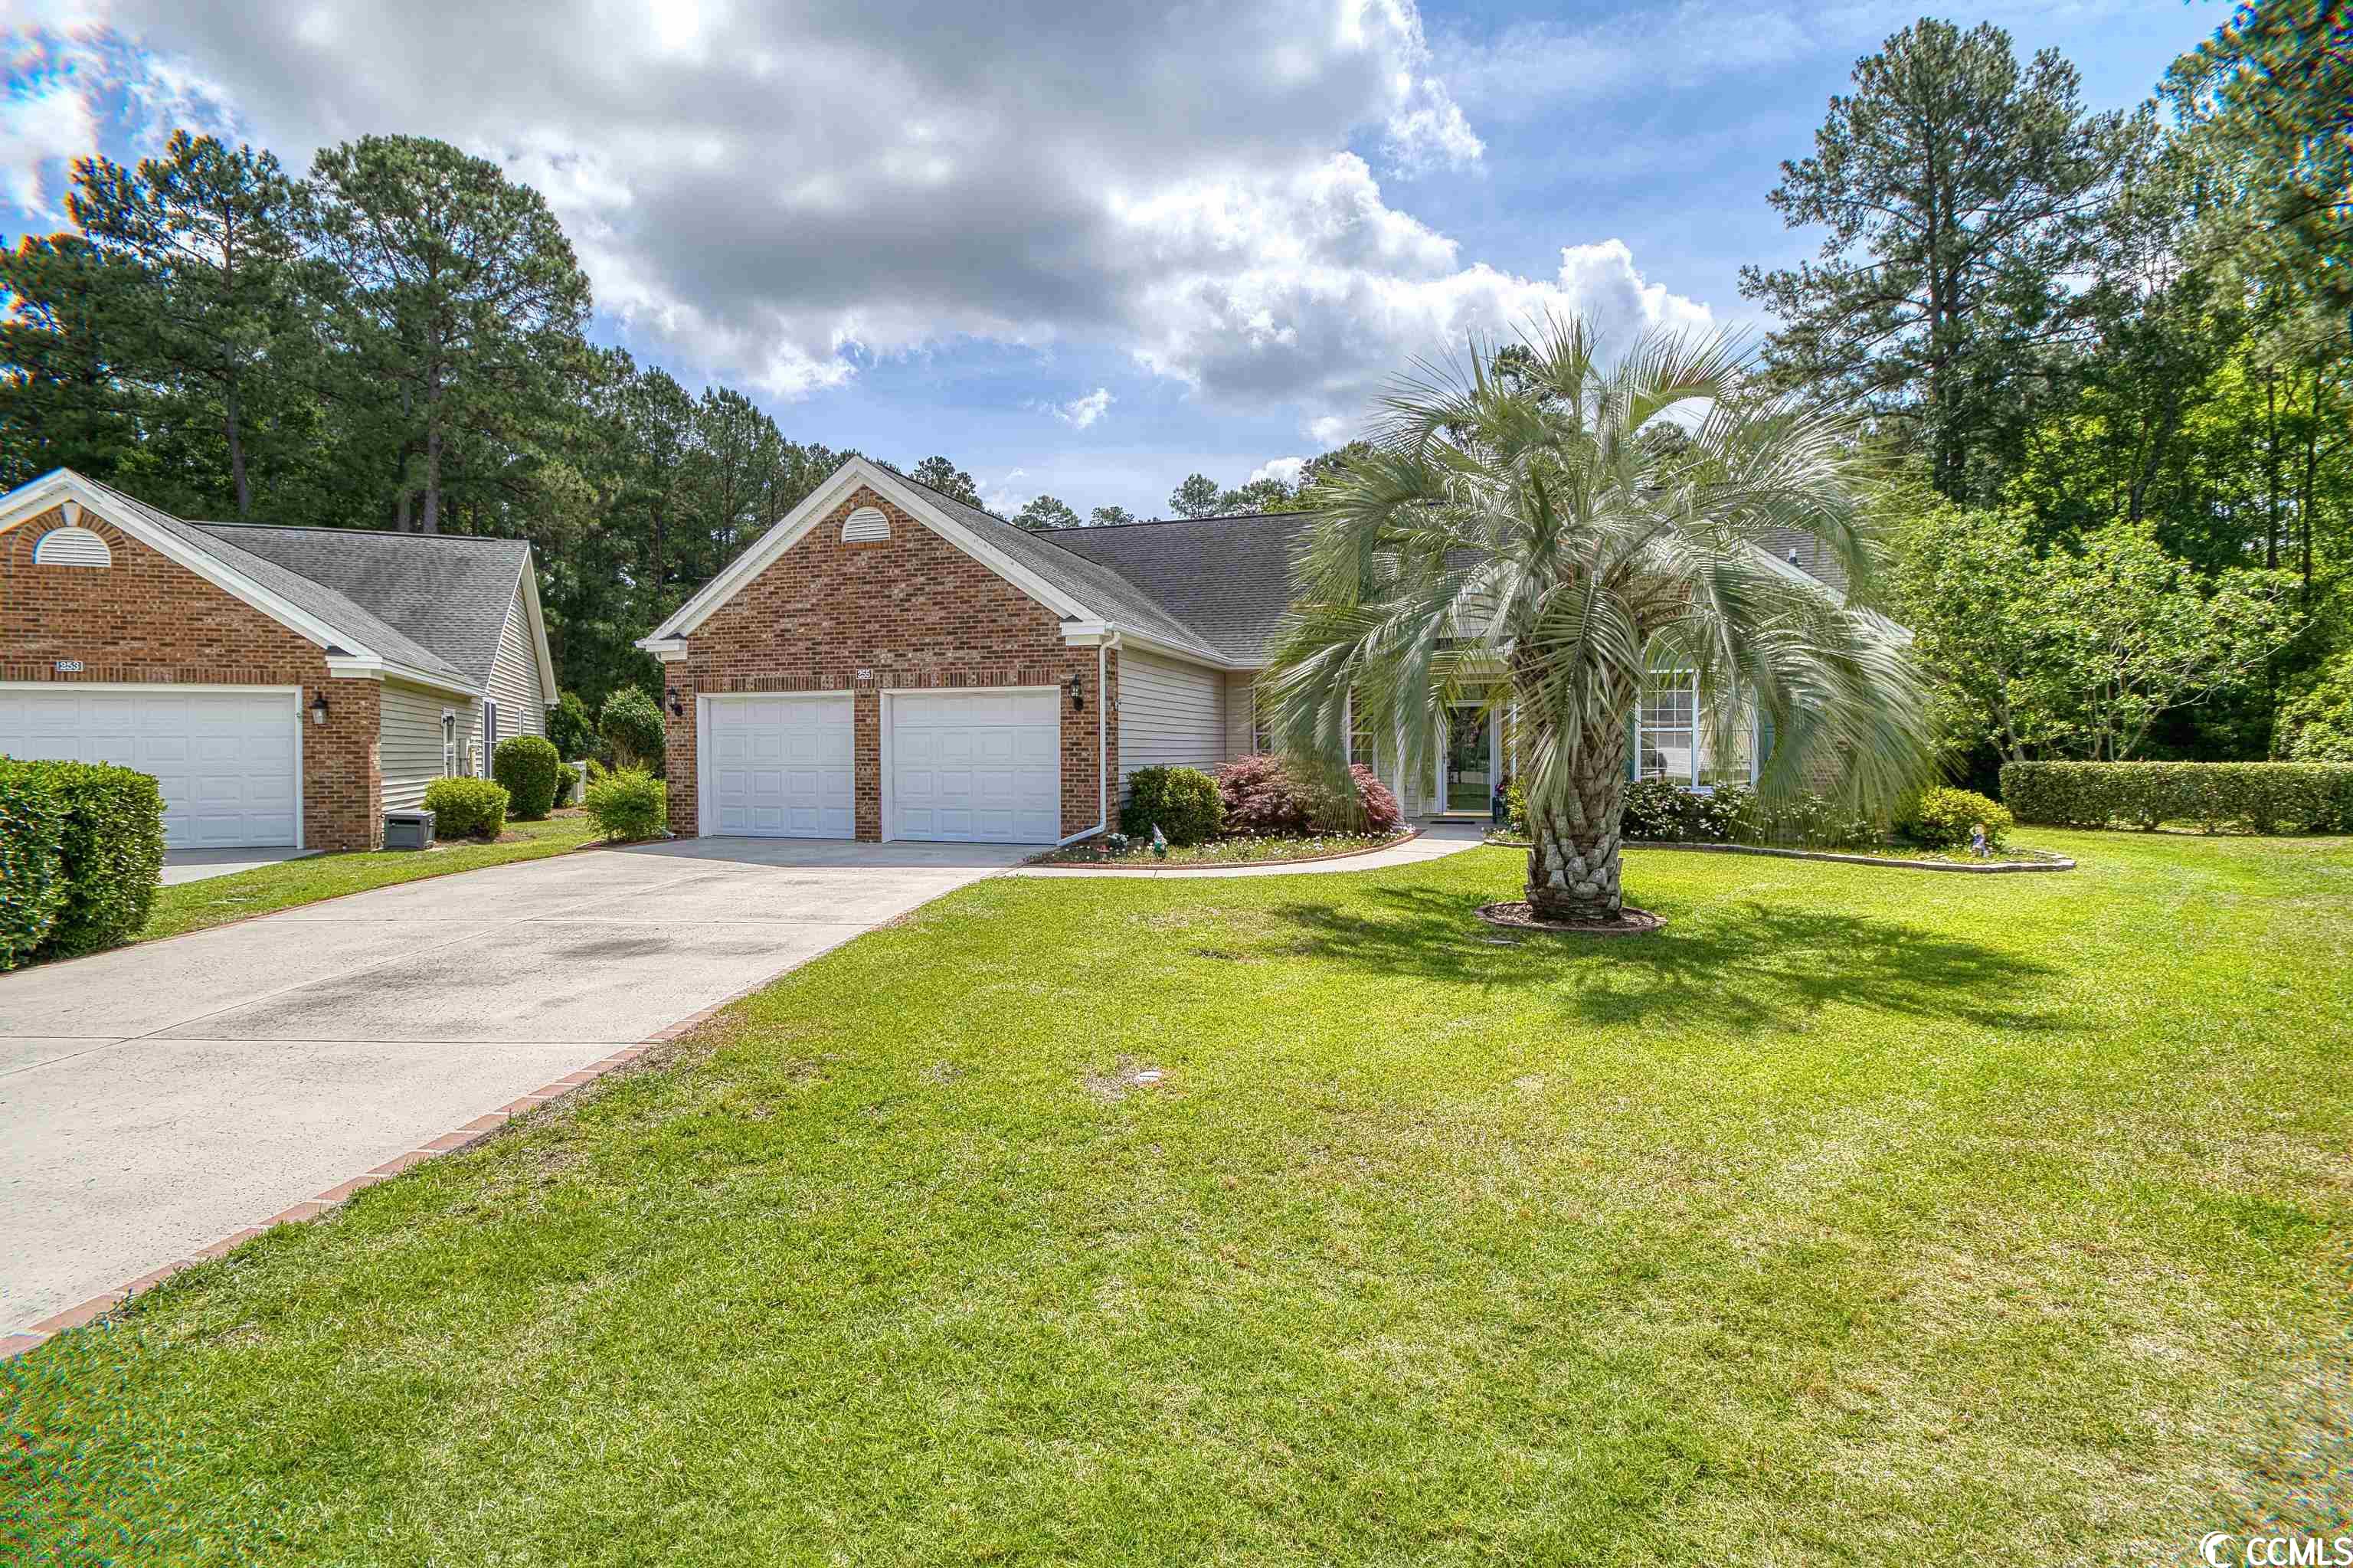 255 Candlewood Dr. Conway, SC 29526